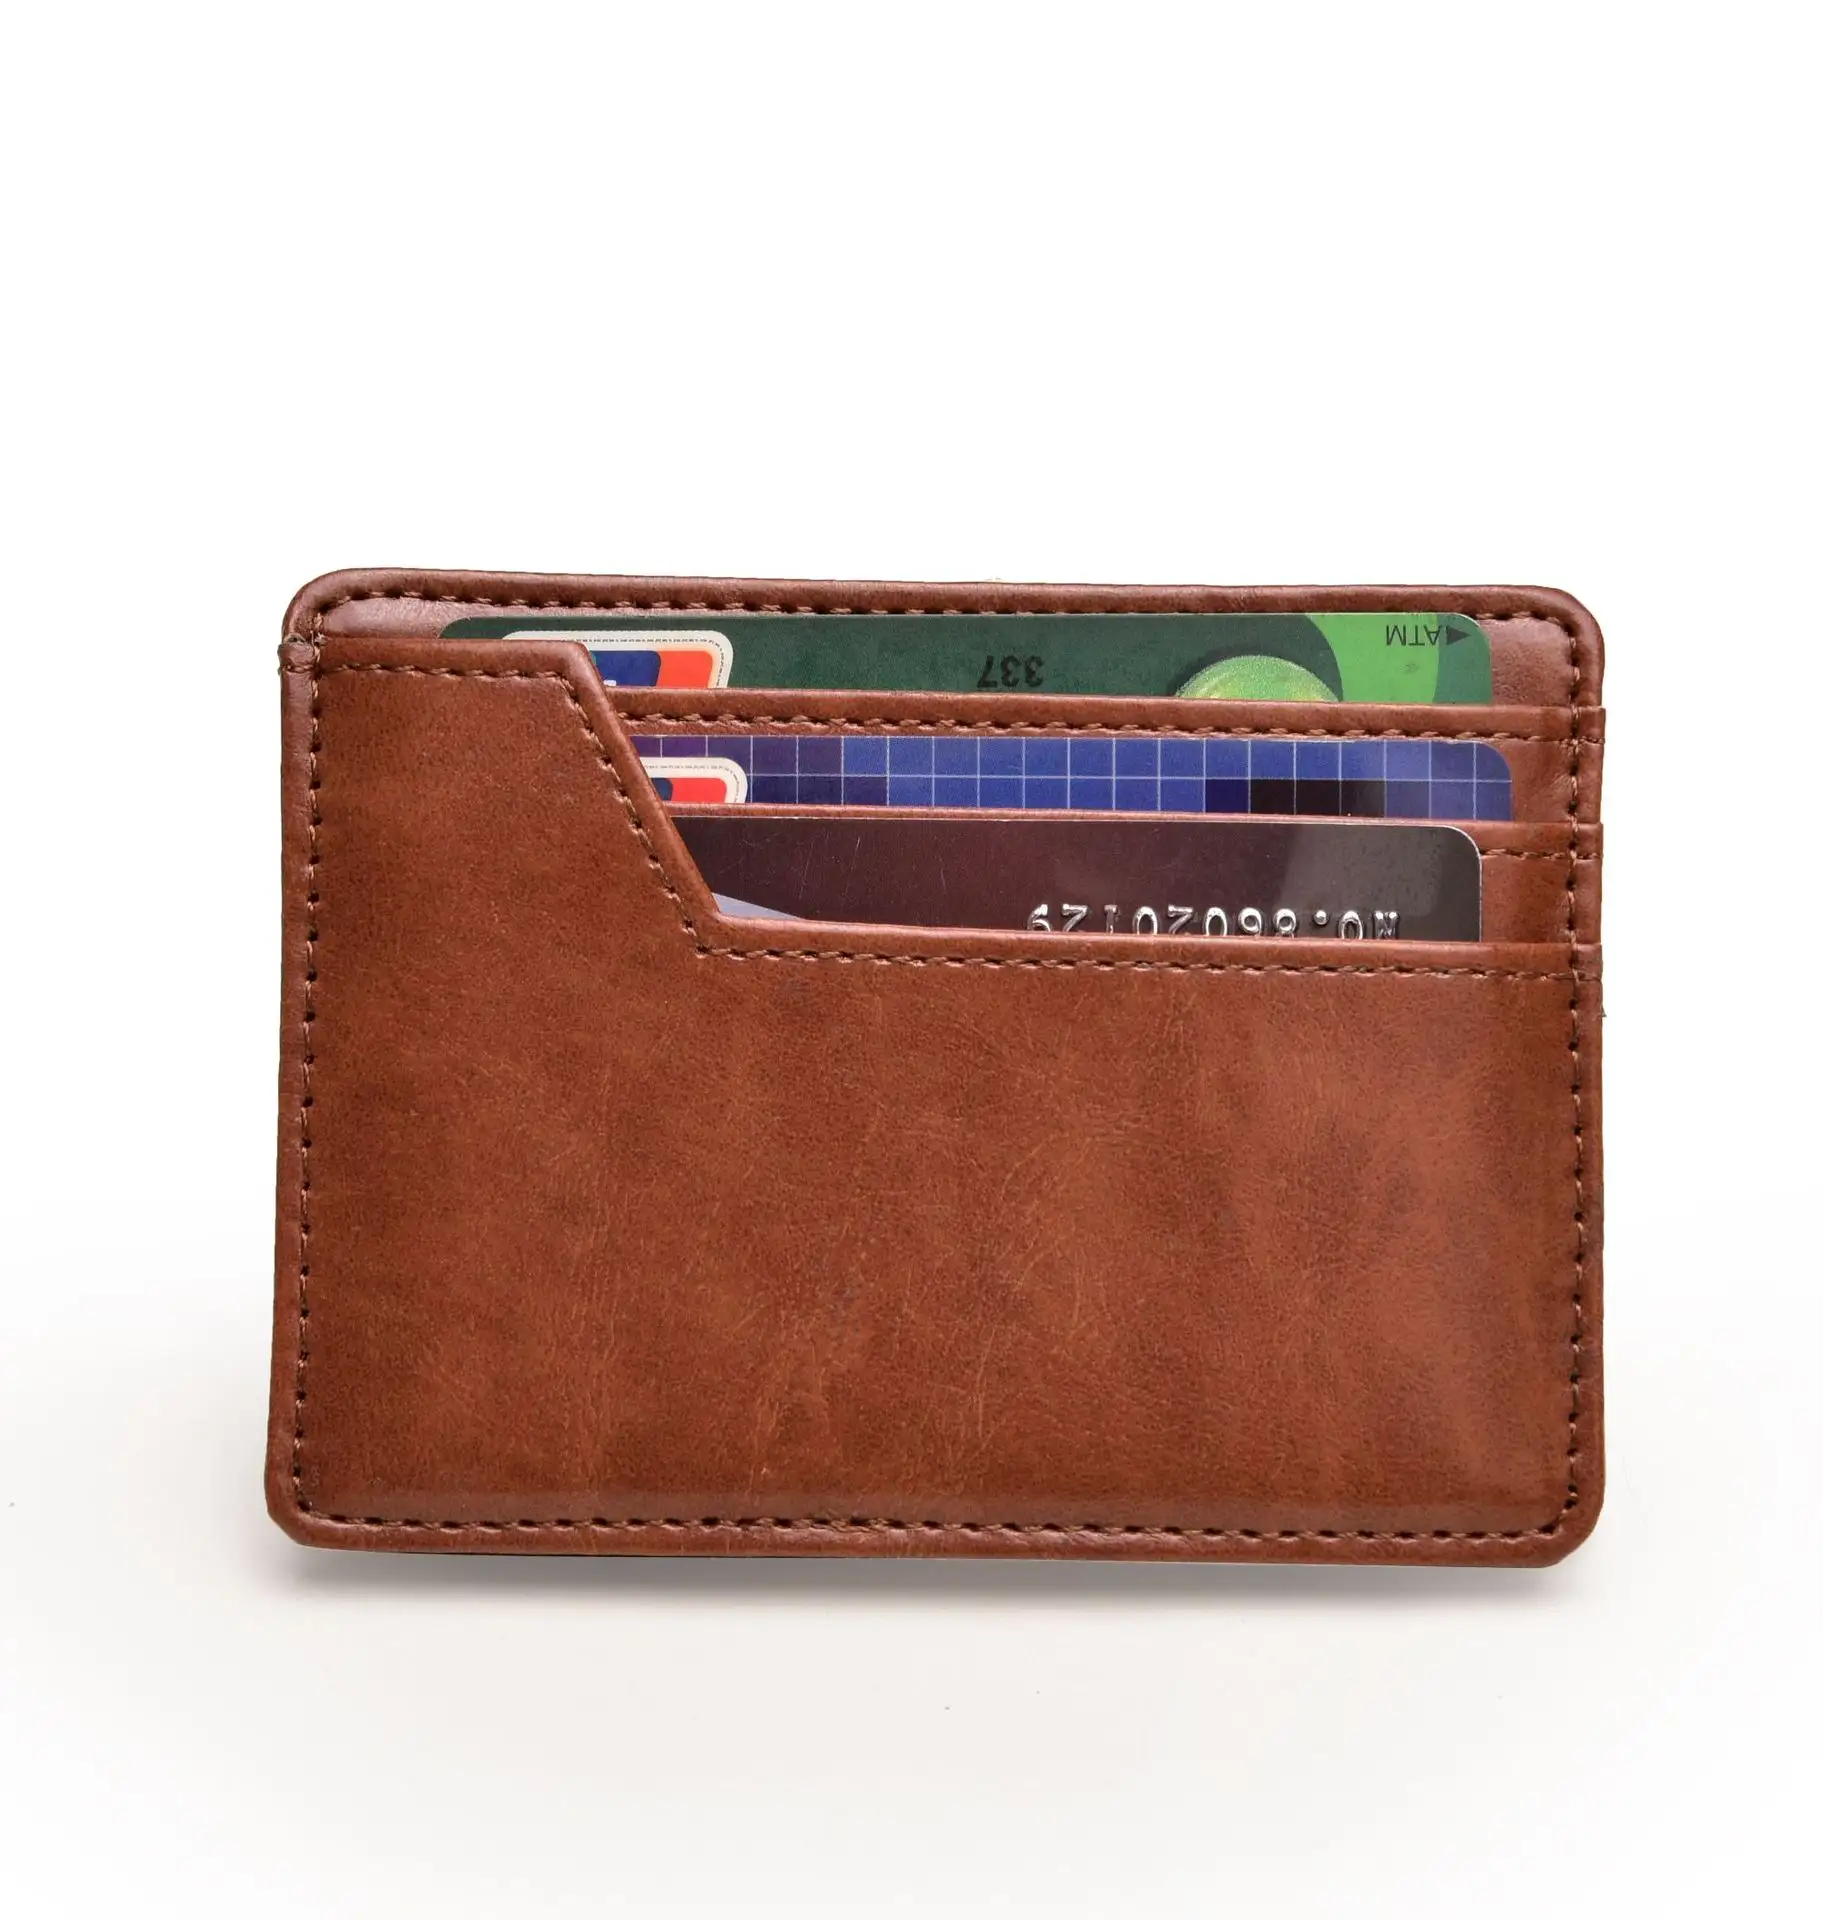 brown genuine vintage leather card holder wallets magic wallet RFID blocking Business wallets with elastic band